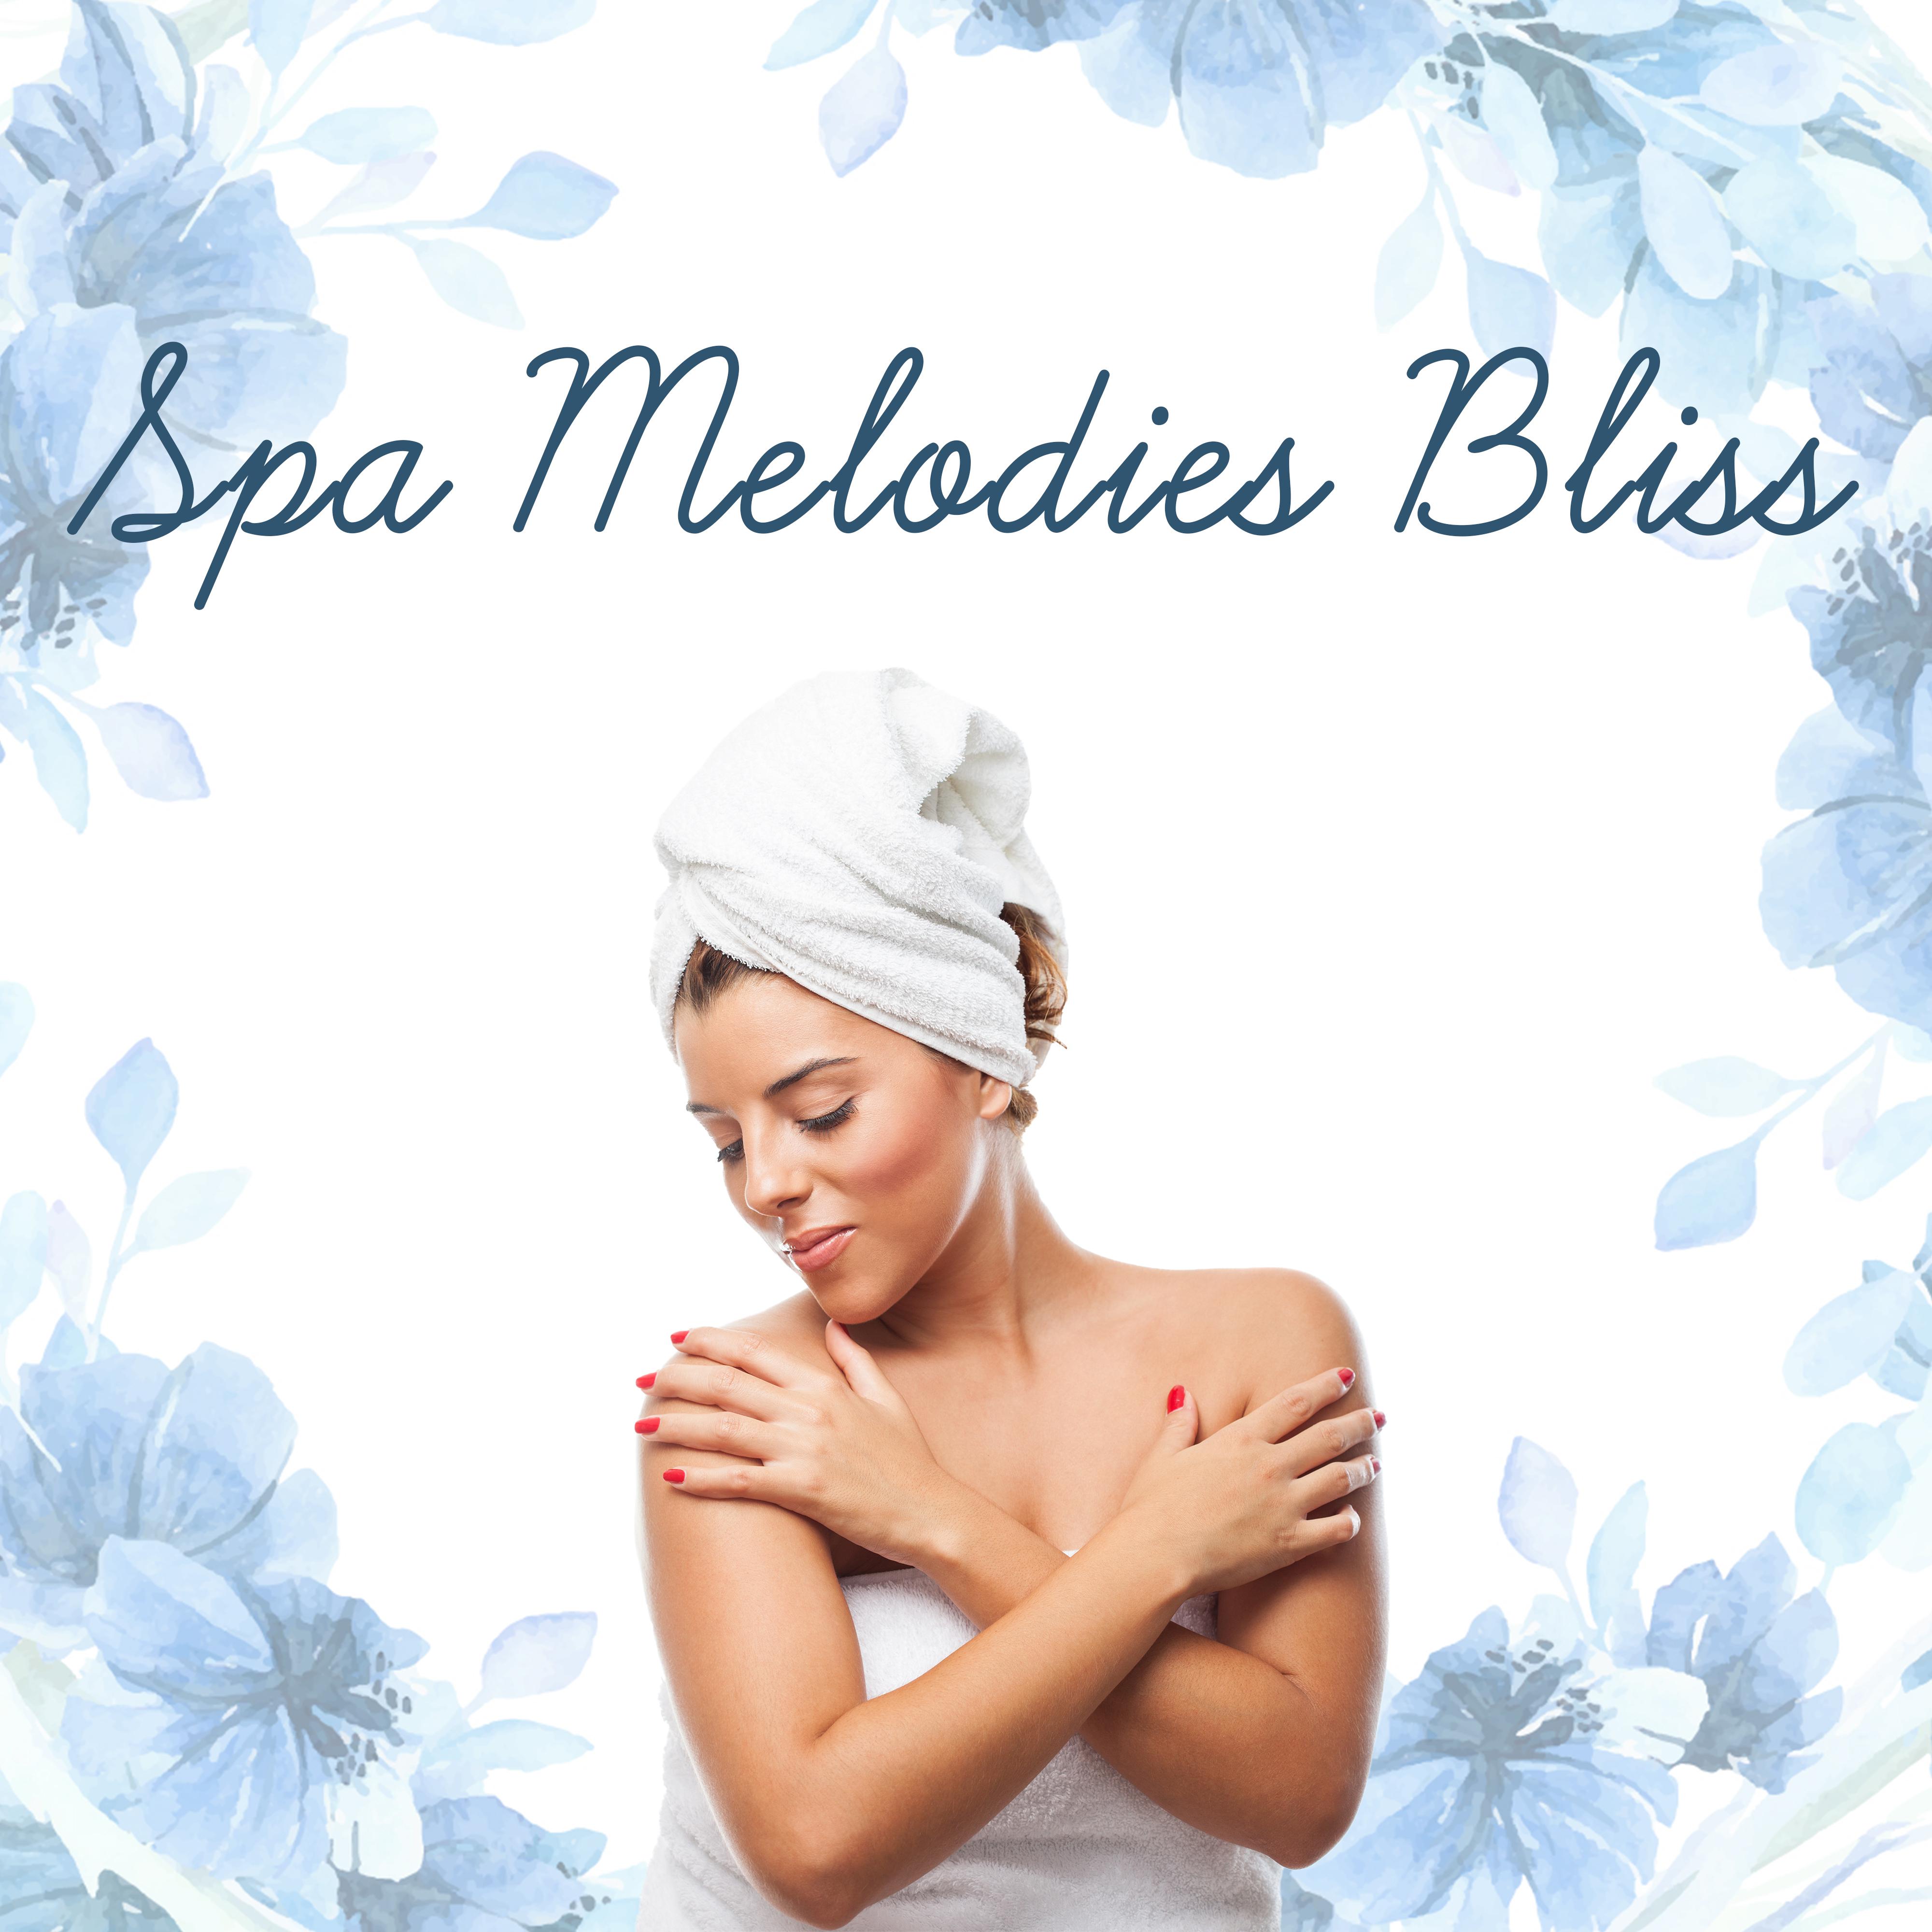 Spa Melodies Bliss